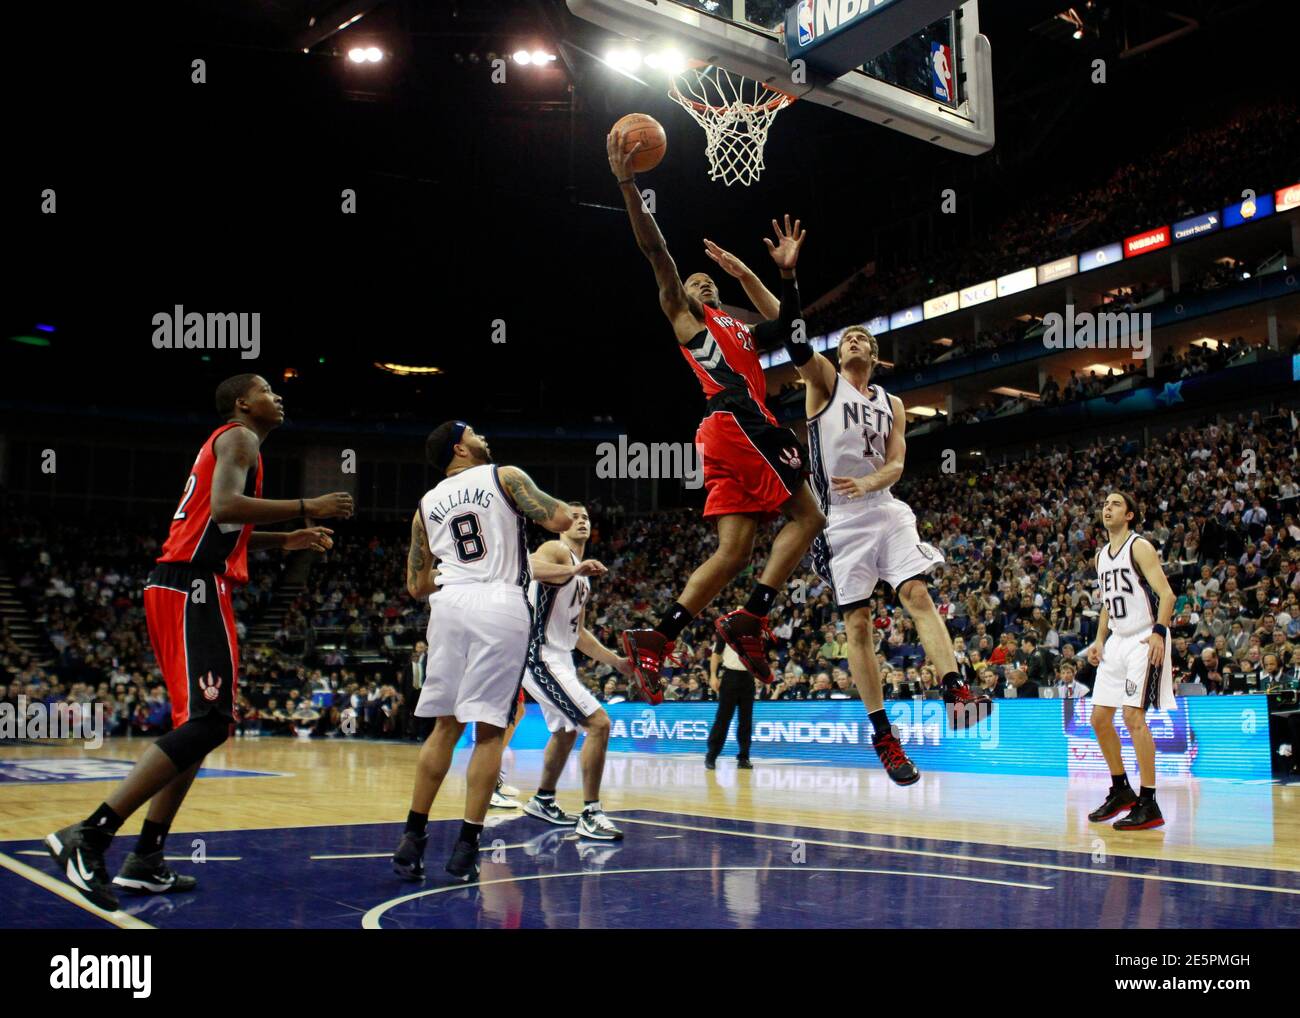 Toronto Raptors forward Sonny Weems (C) scores a basket against New Jersey  Nets in the second quarter of their NBA basketball game in London March 4,  2011. REUTERS/Eddie Keogh (BRITAIN - Tags: